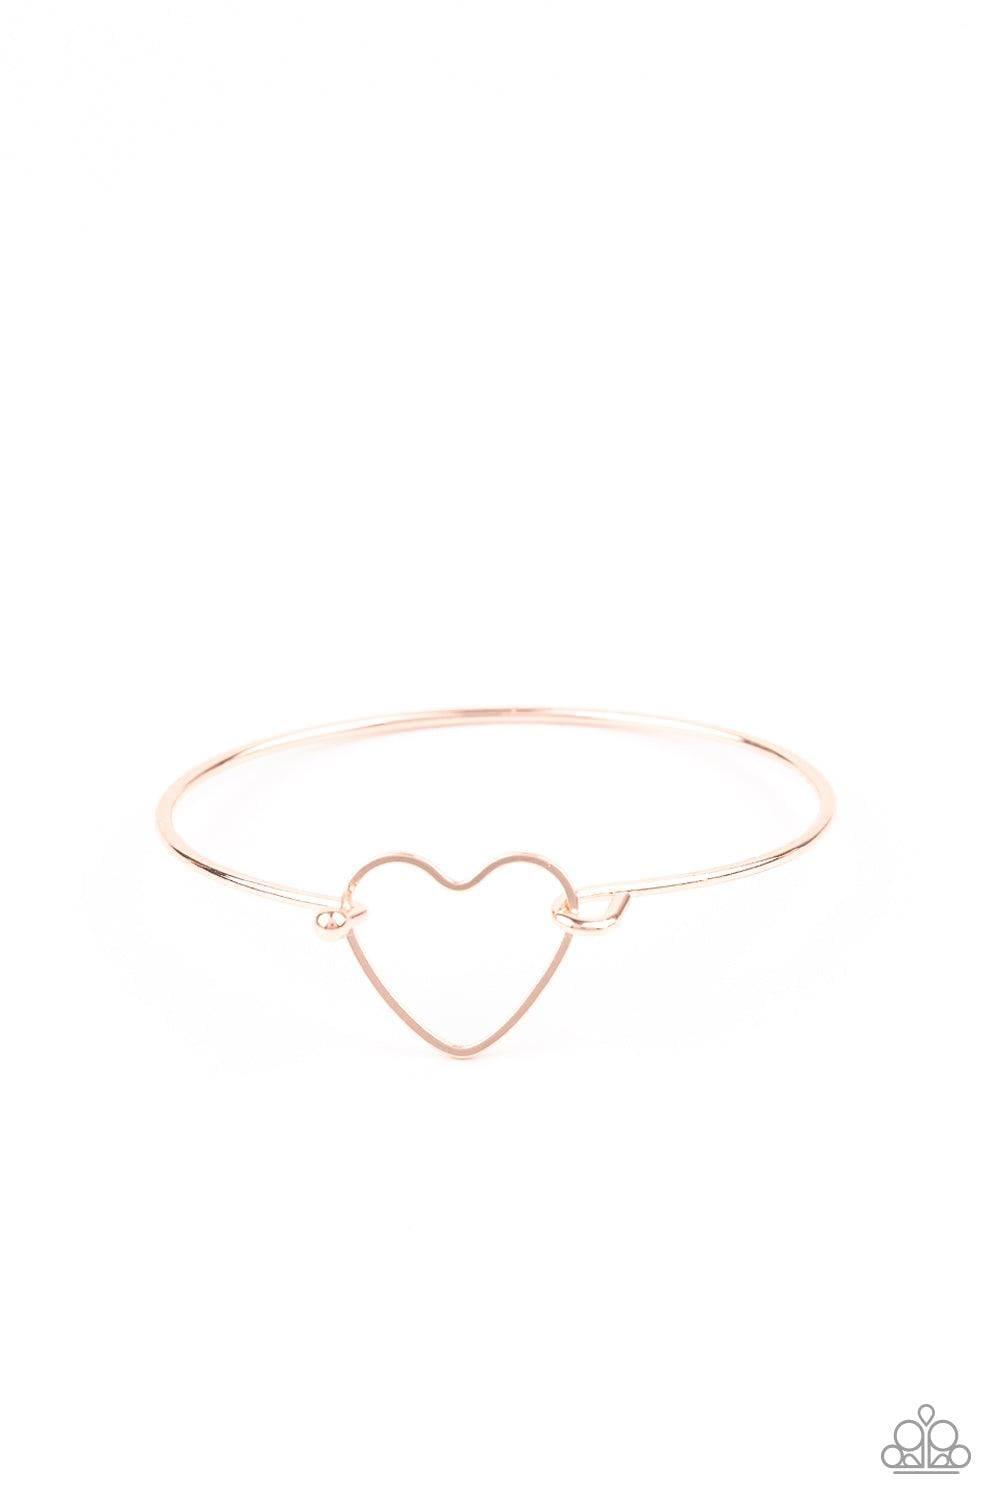 Paparazzi Accessories - Make Yourself Heart - Rose Gold Bracelet - Bling by JessieK